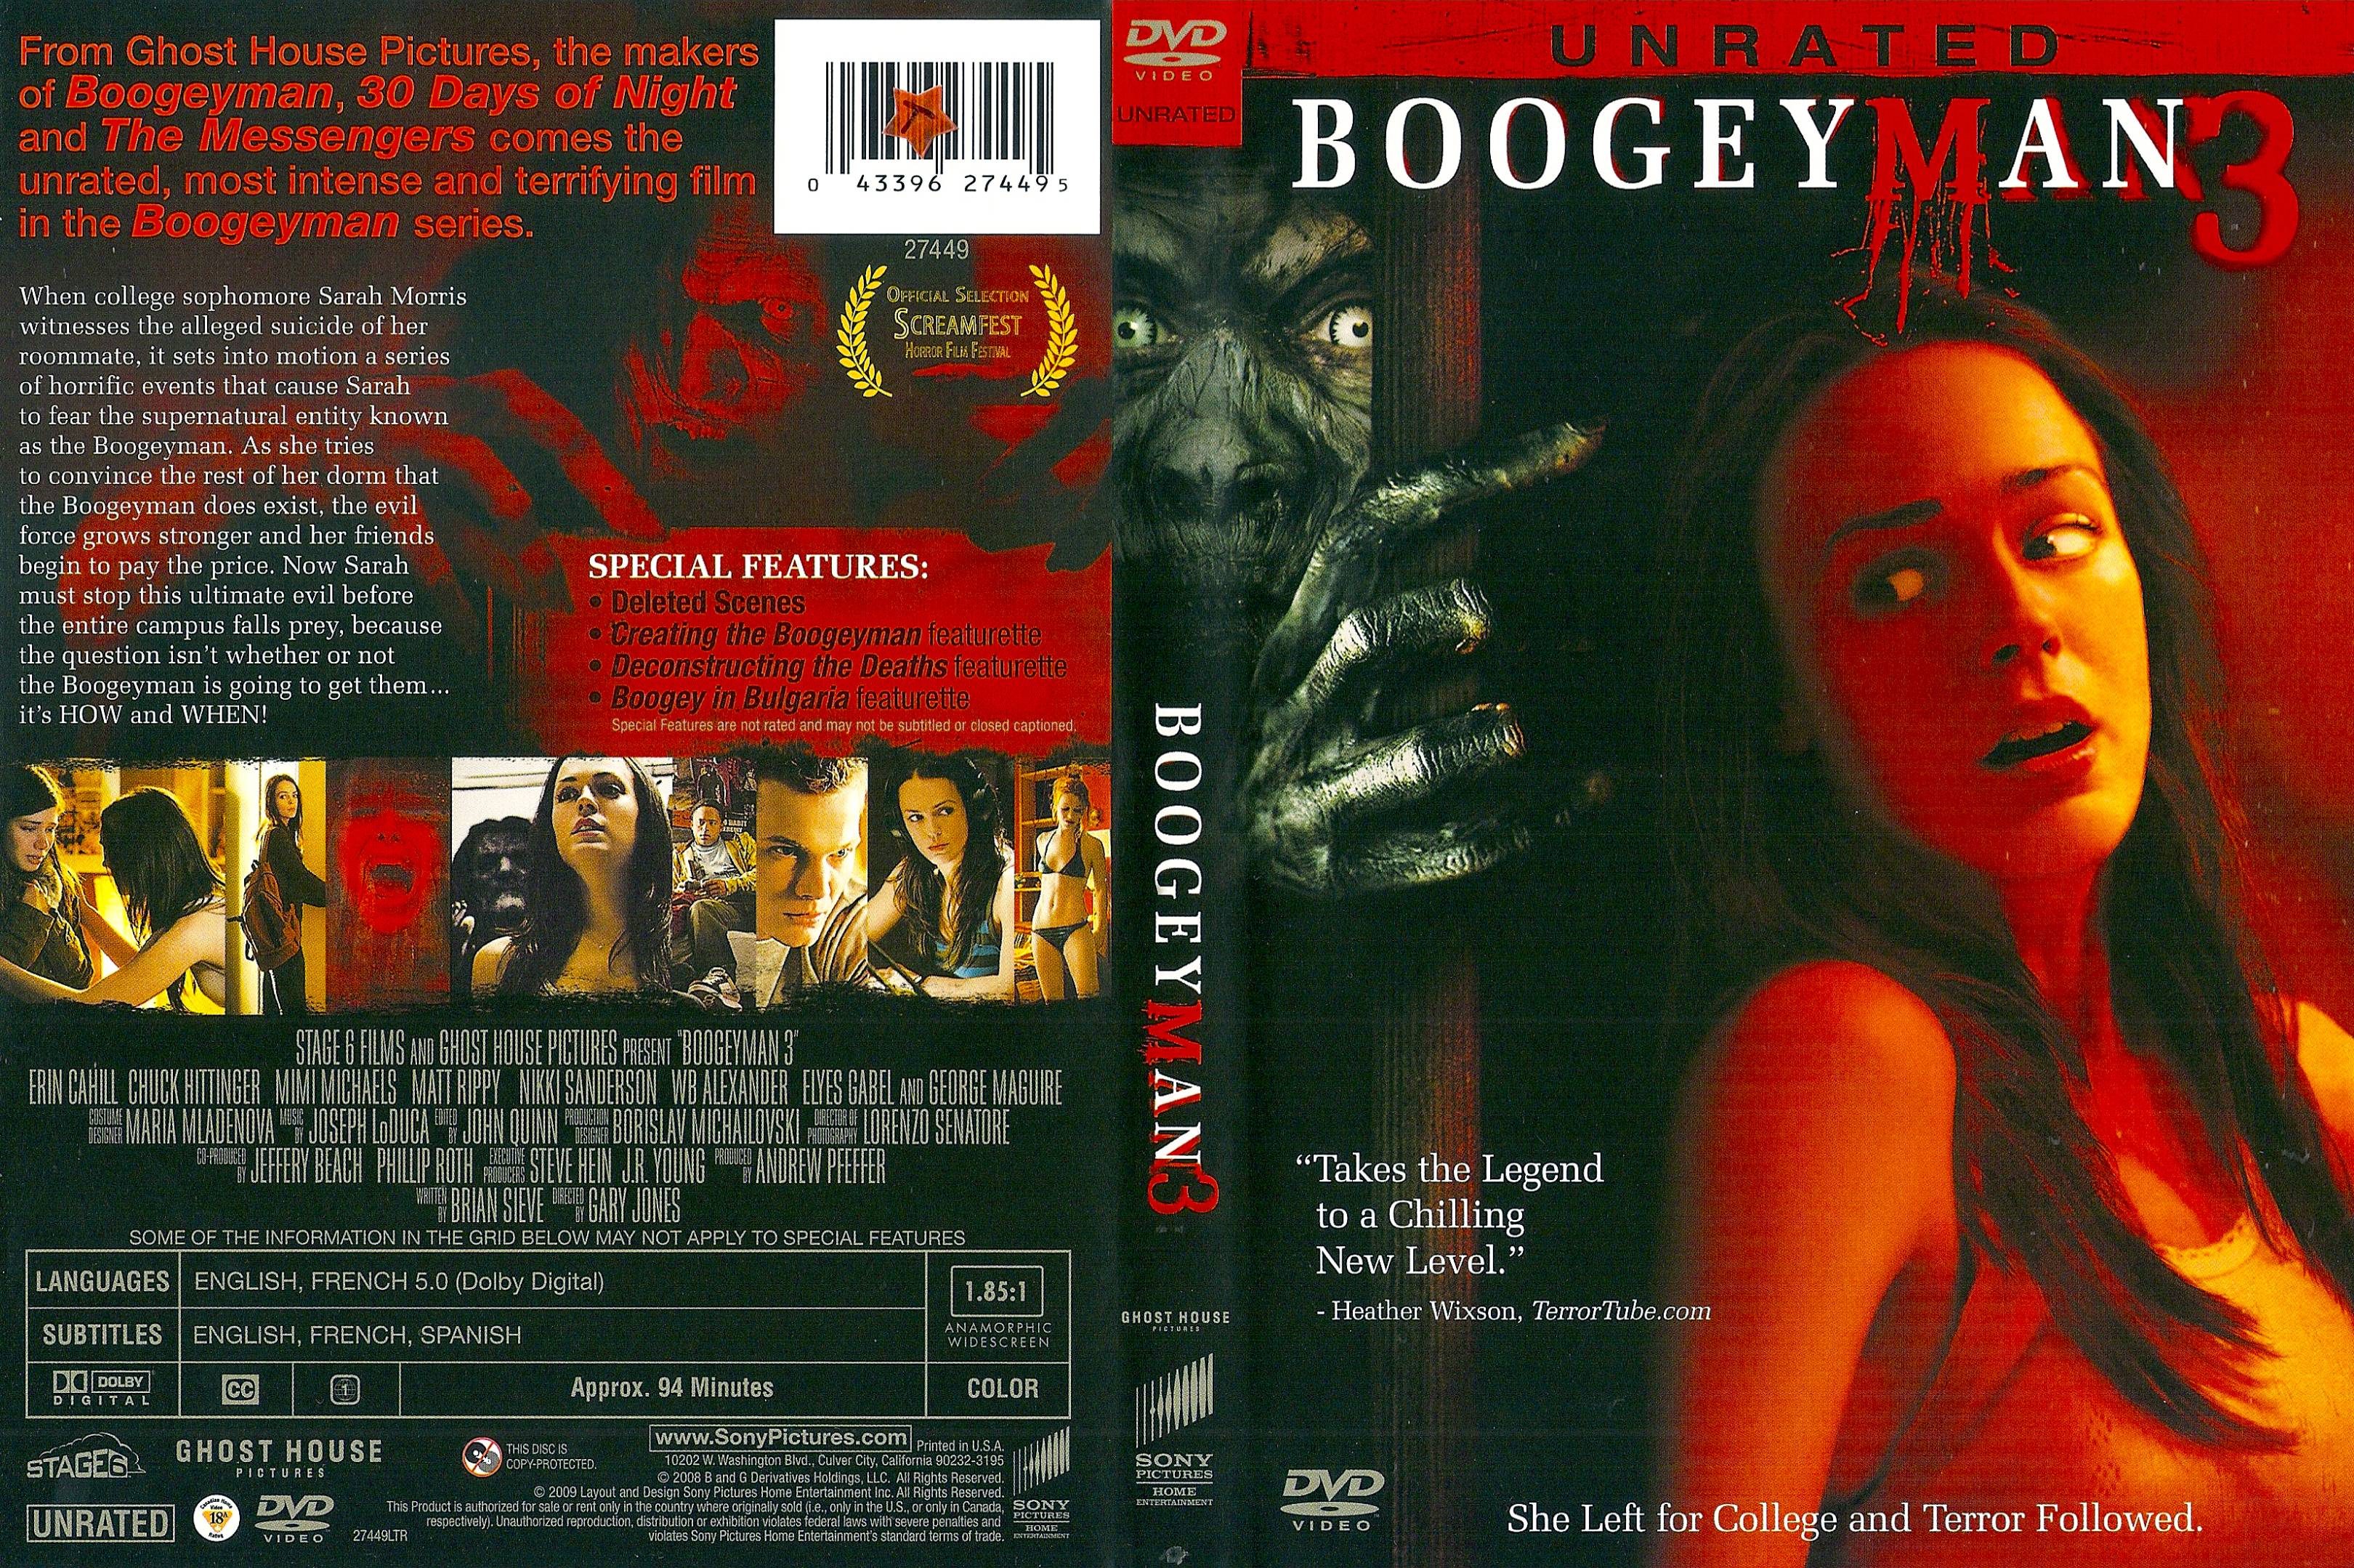 Boogeyman 3 (2008) UNRATED - front back.